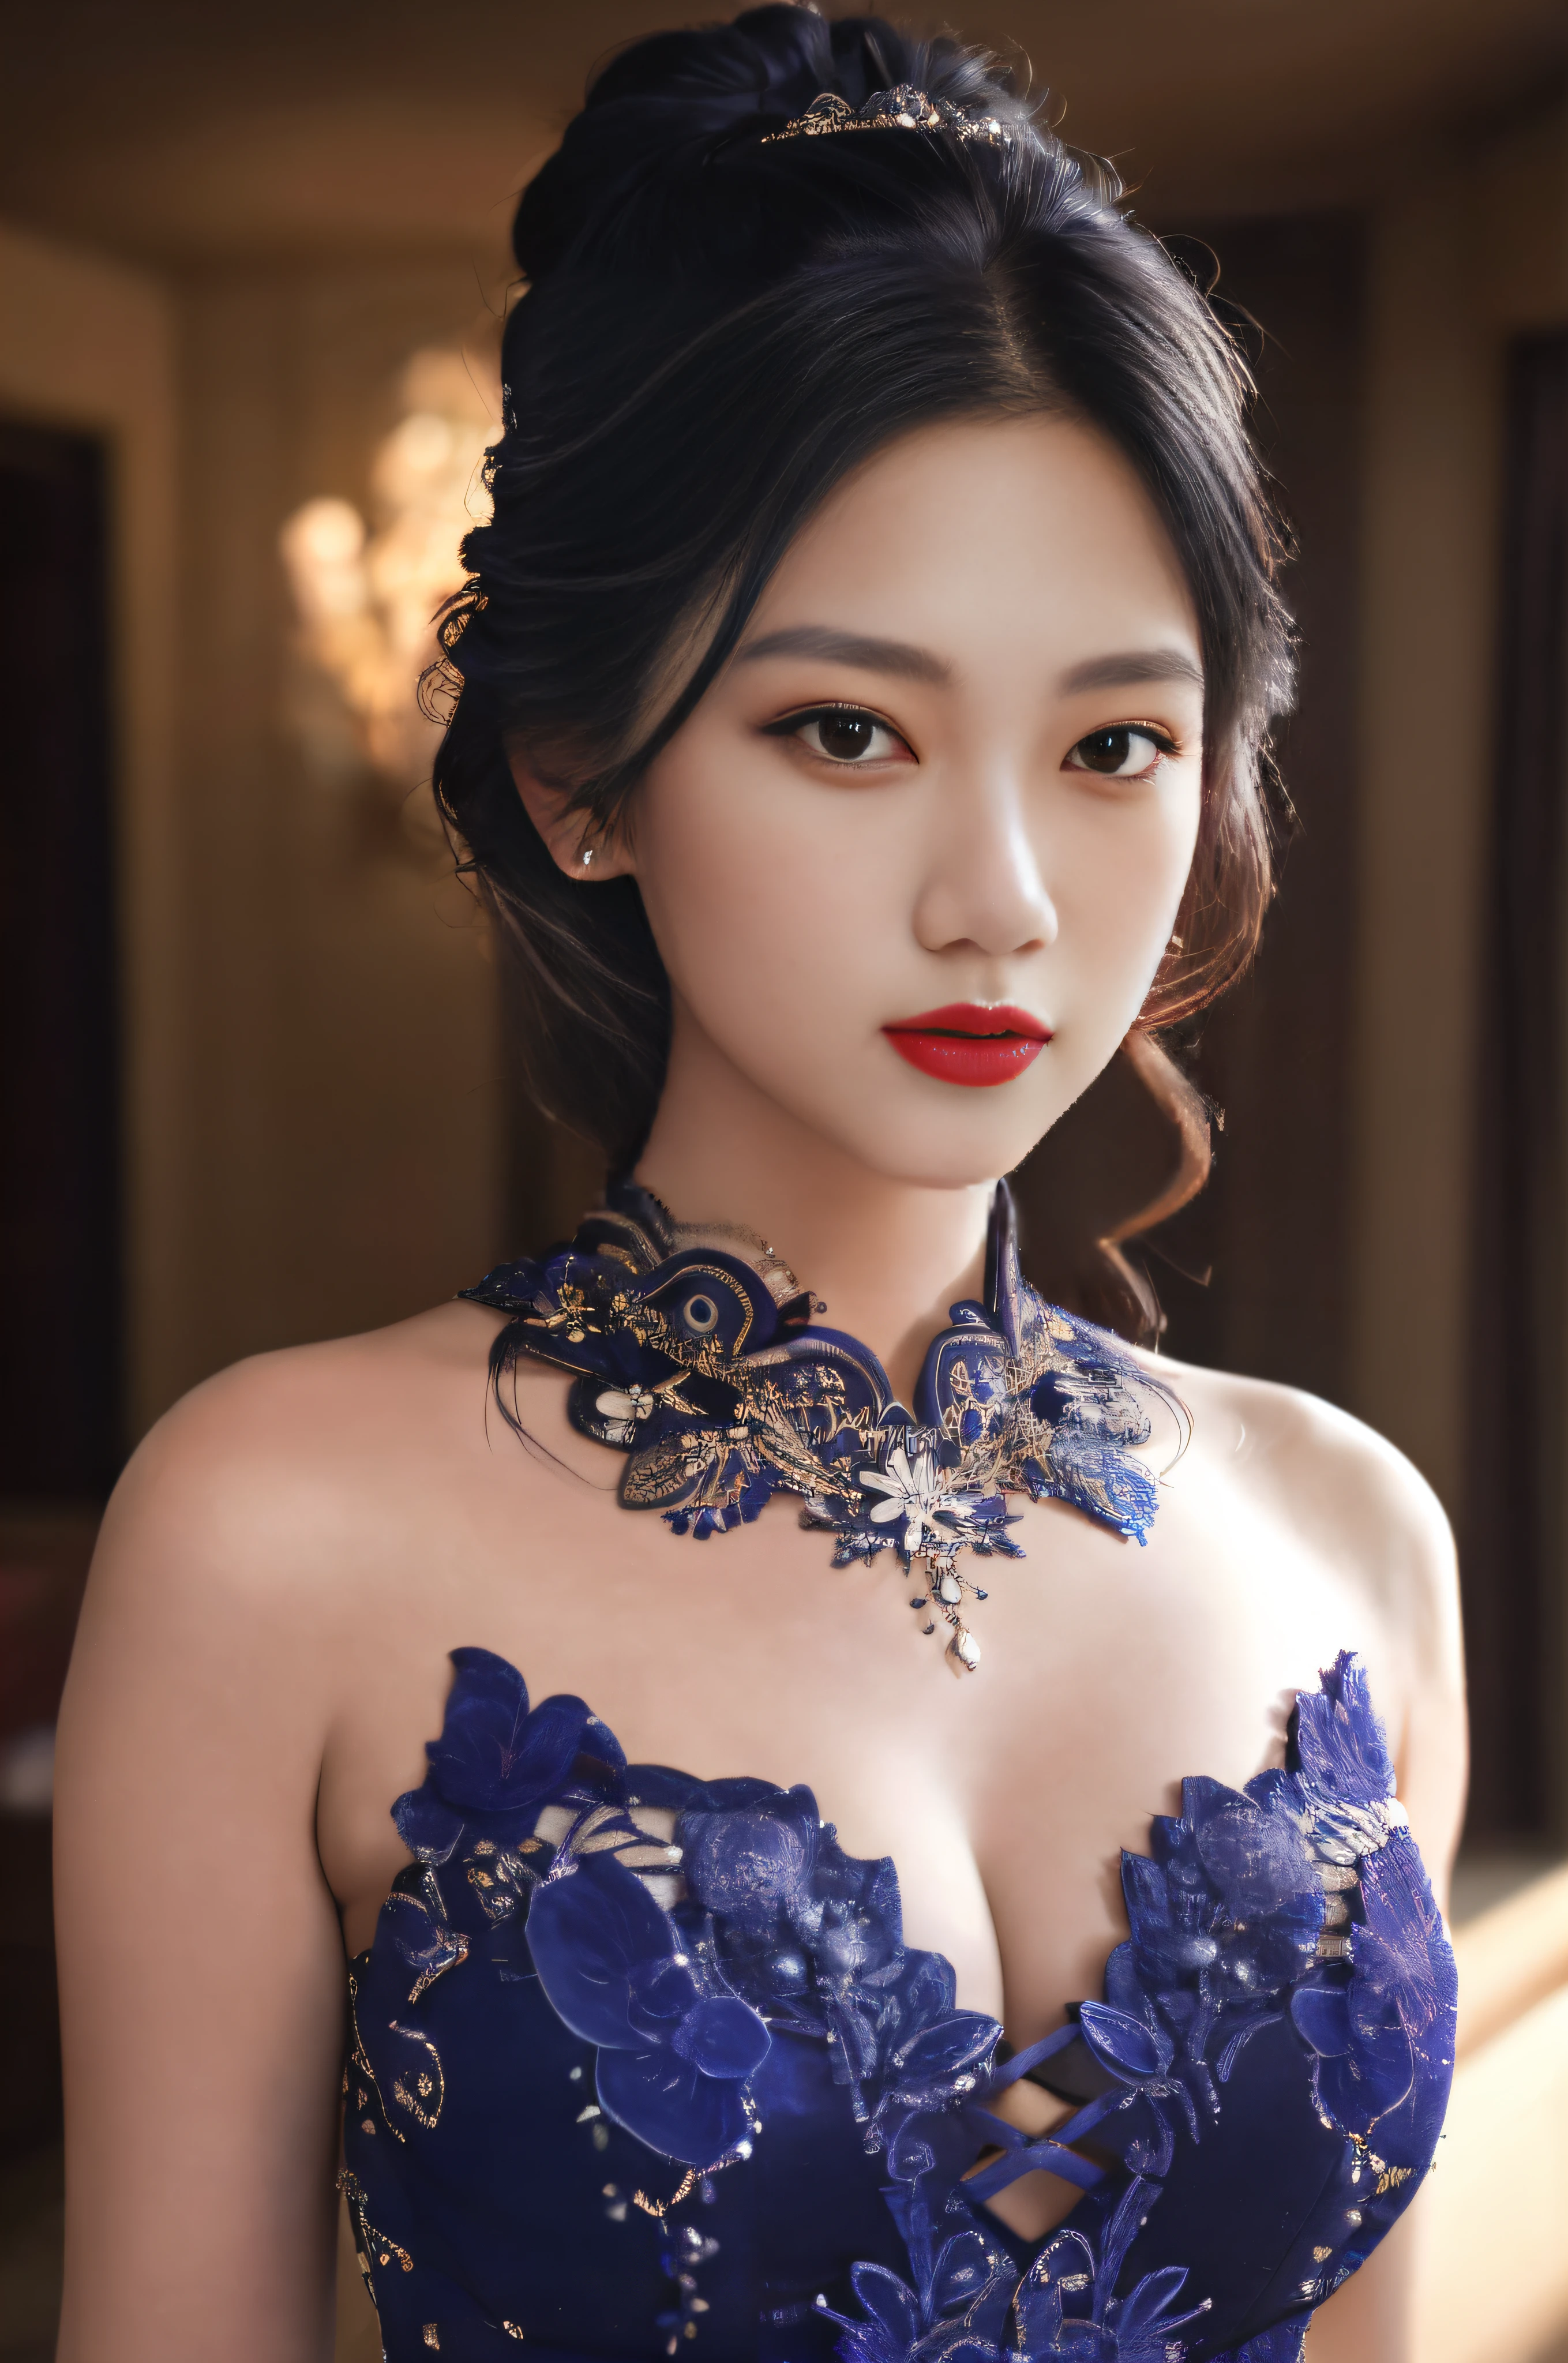 Arakfi woman in blue dress，Wearing a necklace and choke, gorgeous chinese models, Beautiful asian woman, Gorgeous young Korean woman, Beautiful Asian girl, Beautiful oriental woman, asian beautiful face, Beautiful young Korean woman, Beautiful young Asian woman, Very beautiful young woman, beautiful Korean women, gorgeous beautiful woman, A beautiful young woman, sensual face，Full of makeup